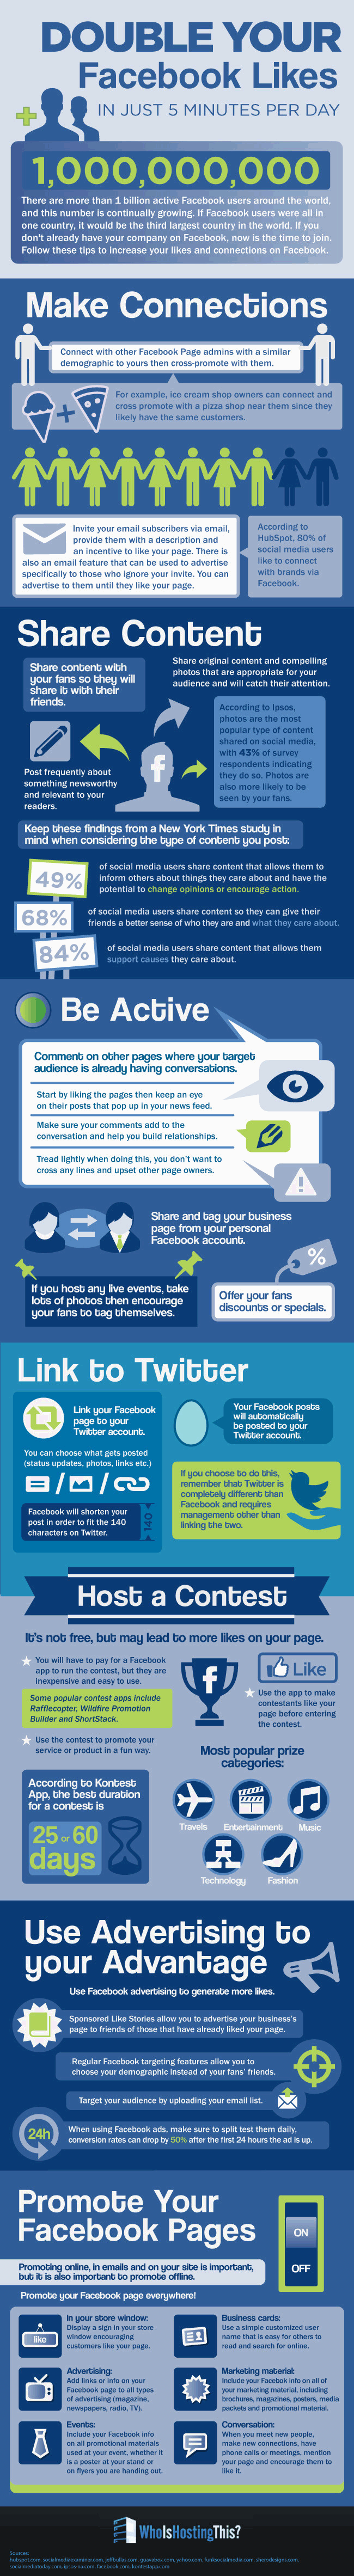 Double Your Facebook Likes In Just 5 Minutes Per Day Infographic